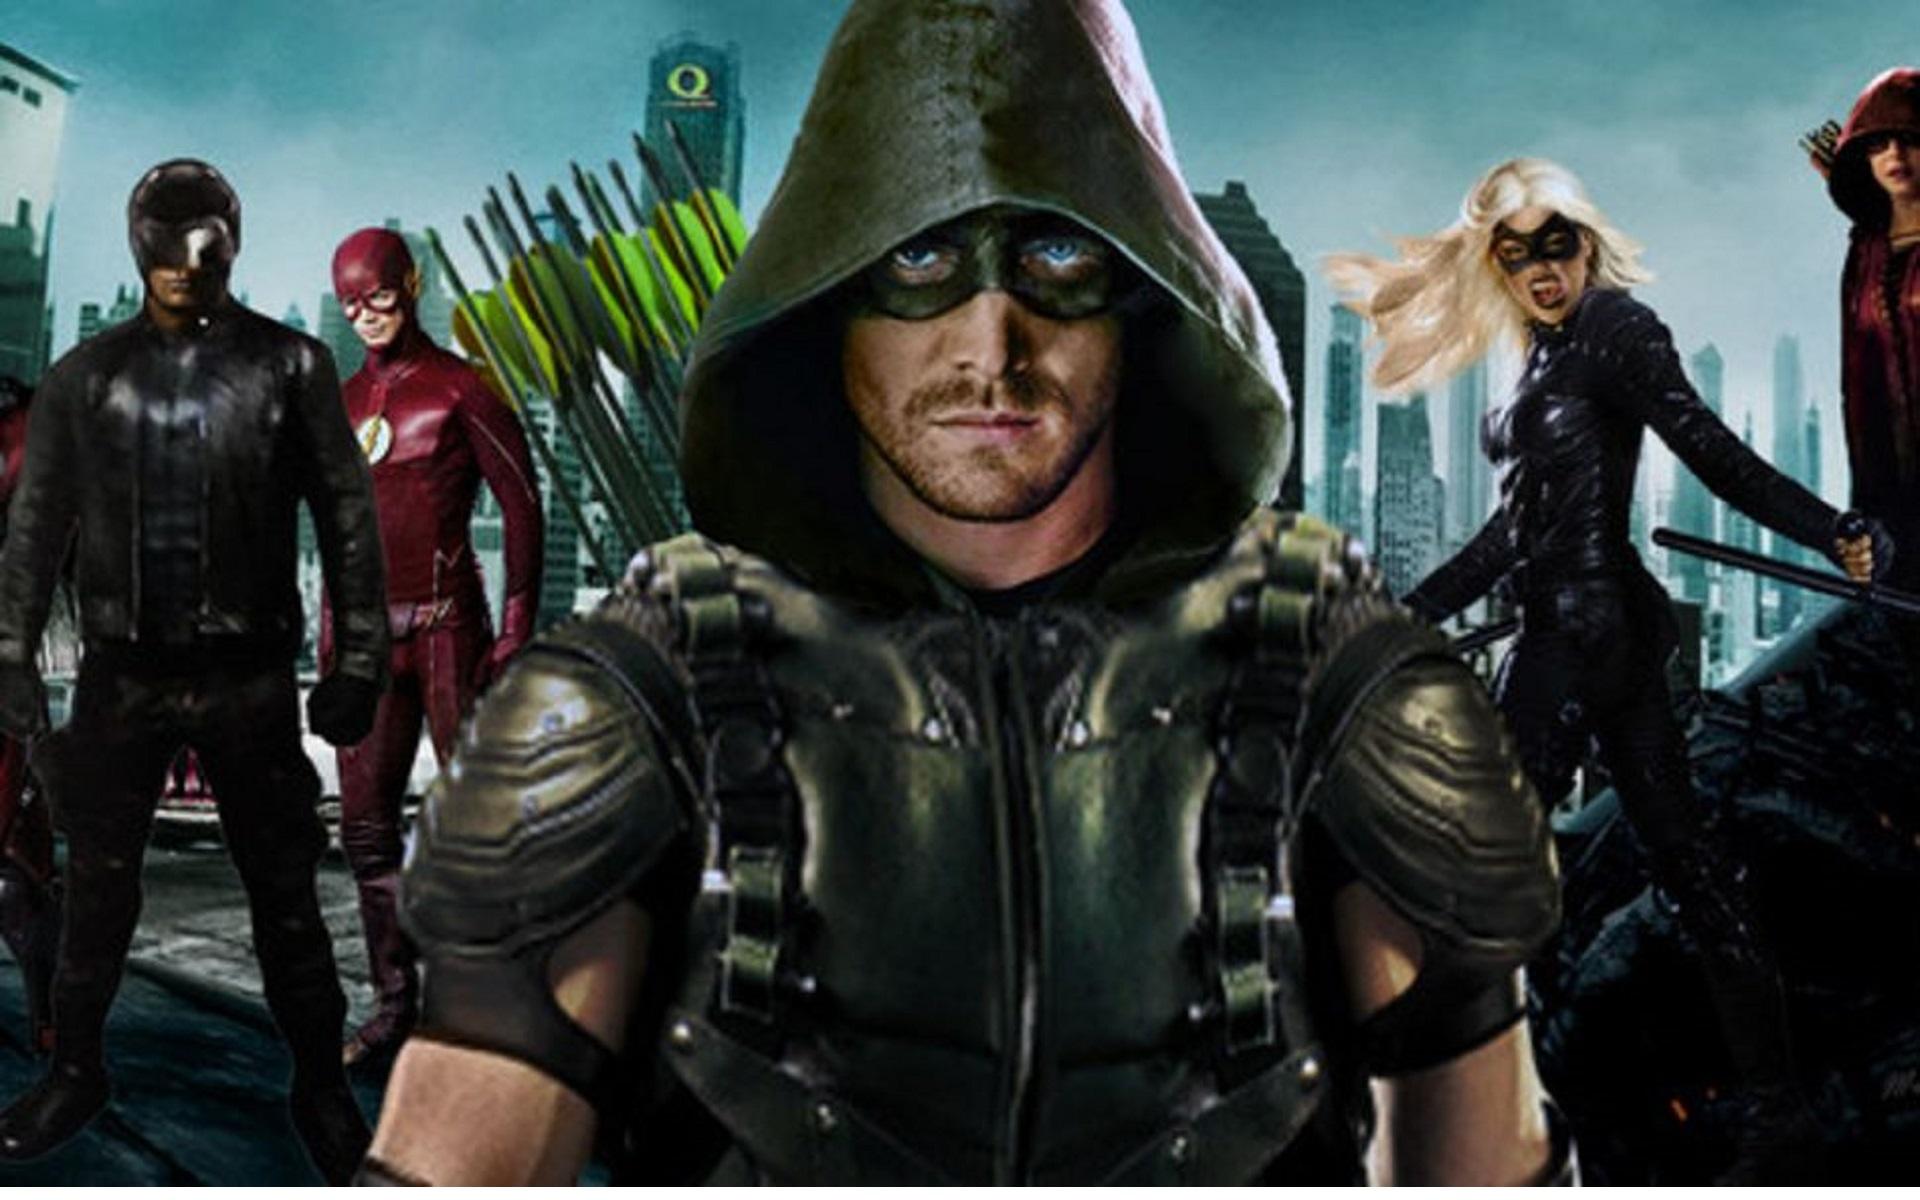 Awesome Arrow Series Picture and Wallpaper